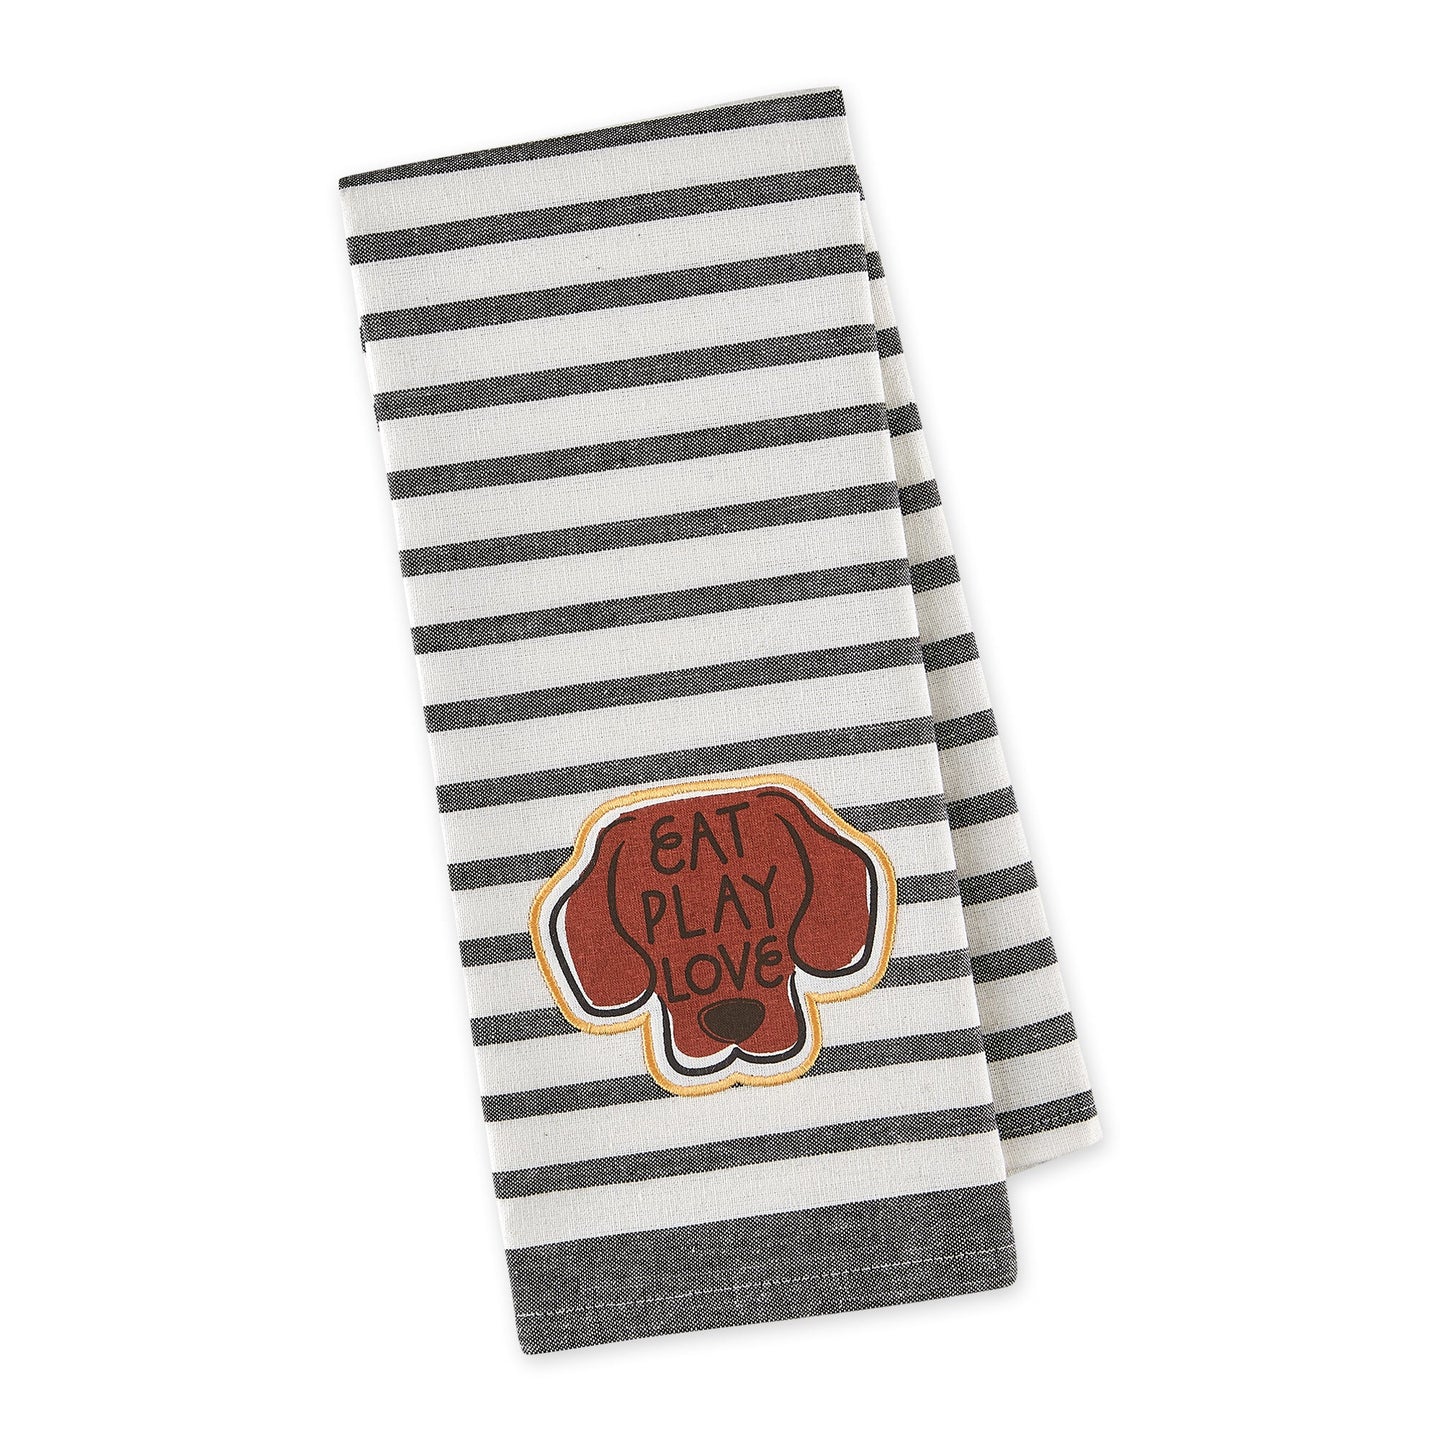 Eat Play Love Embellished Dish Towel